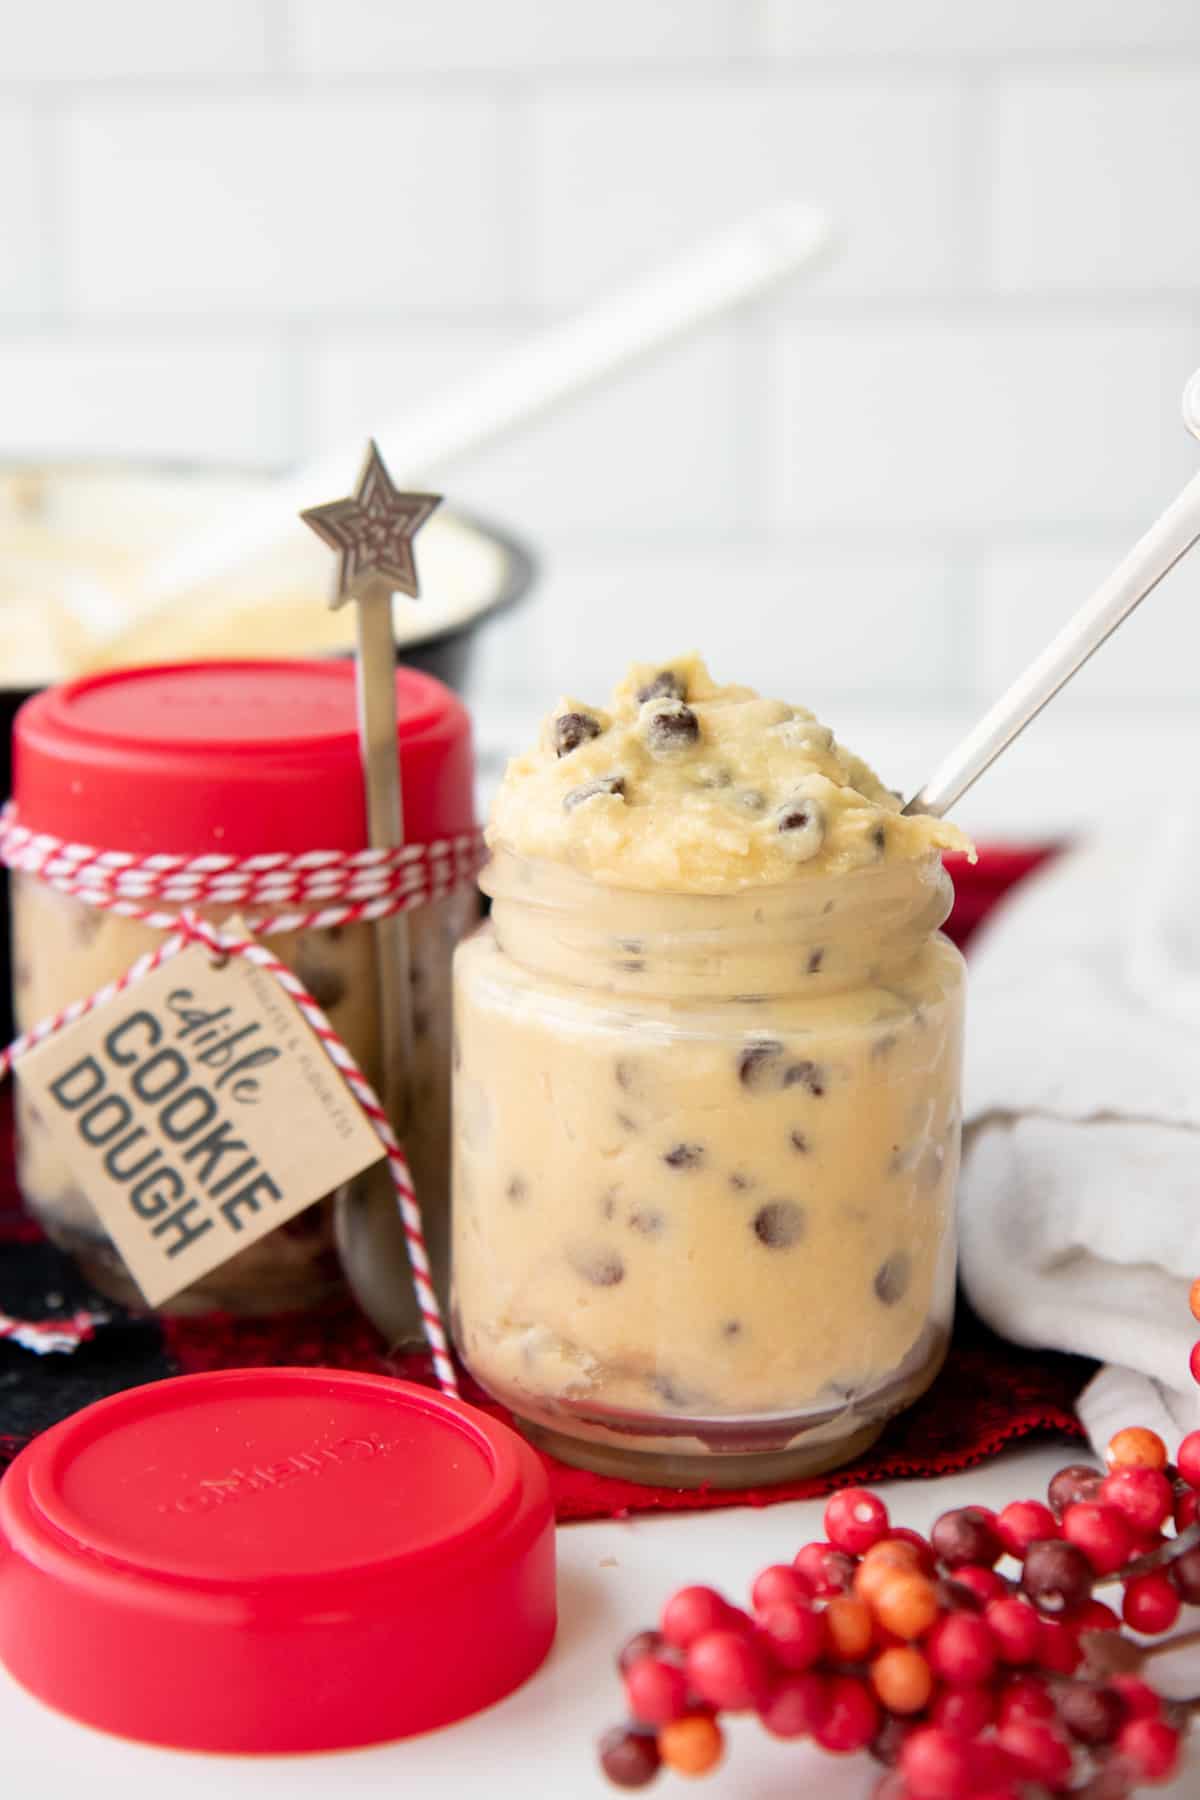 An open jar of edible cookie dough with a white spoon in it sits in front of a packaged jar of the dough.